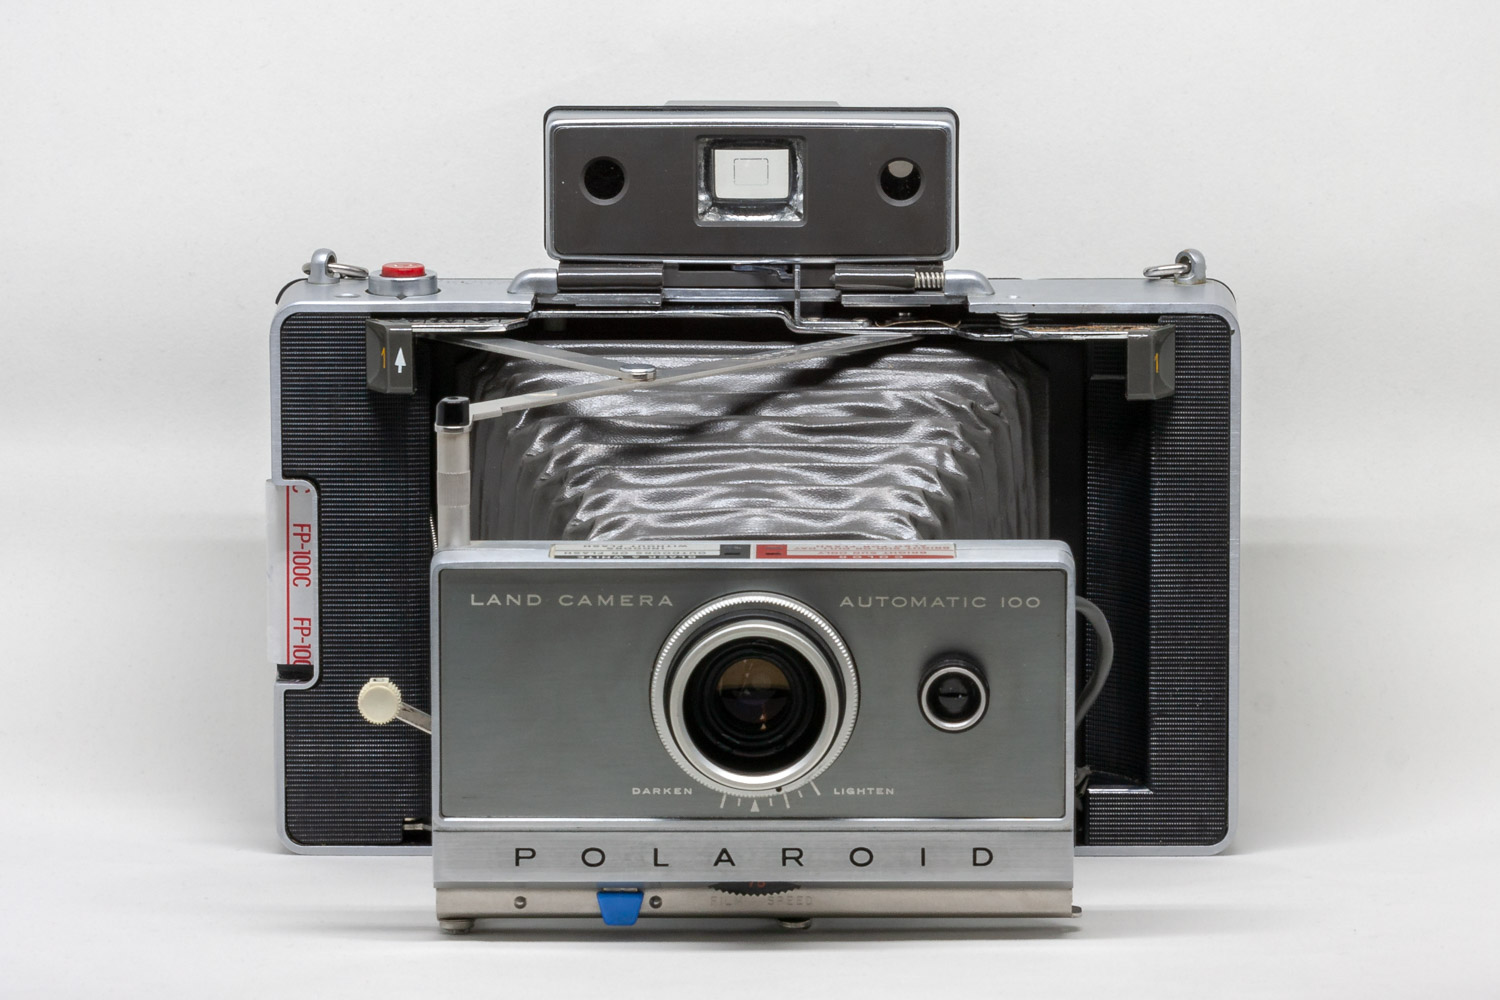 Front View of Polaroid Automatic 100 Land Camera